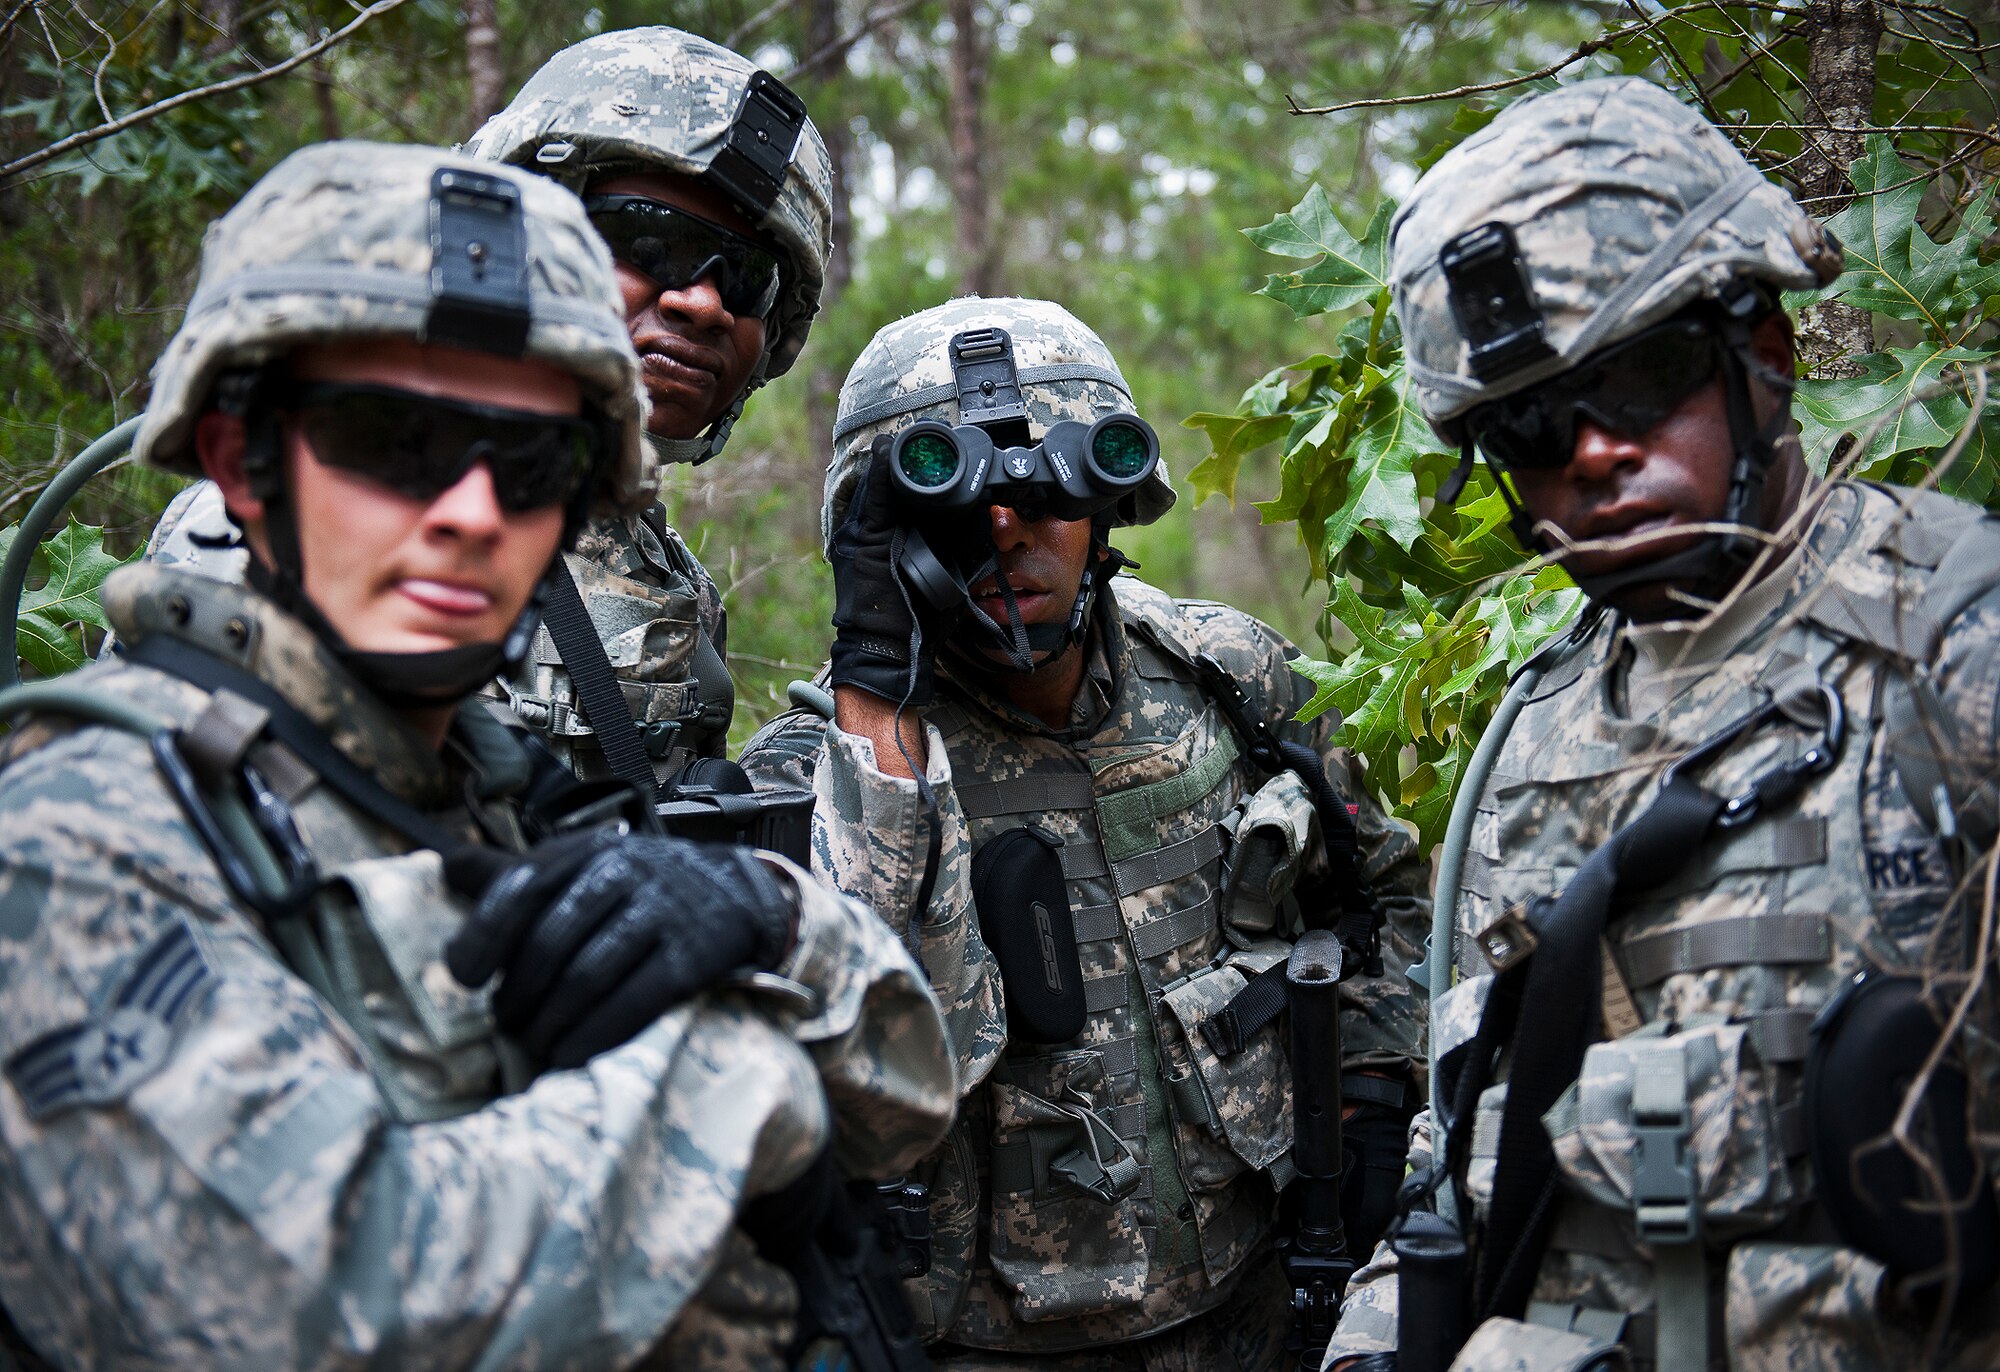 Senior Airman William Whitlow, of the 164th Security Forces Squadron, and his fire-team check out a possible weapons cache during a dismounted patrol as part of the three-day Brave Defender field training exercise May 19 at Eglin Air Force Base, Fla.  The exercise is the culmination of Air Force Materiel Command’s six-week security forces deployment training, administered by the 96th Ground Combat Training Squadron. GCTS instructors teach 10 training classes a year, which consists of improvised explosive device detection and reaction, operating in an urban environment, mission planning, land navigation and casualty care and more. More than 140 active-duty and National Guard Airmen attended this training. (U.S. Air Force photo/Samuel King Jr.)